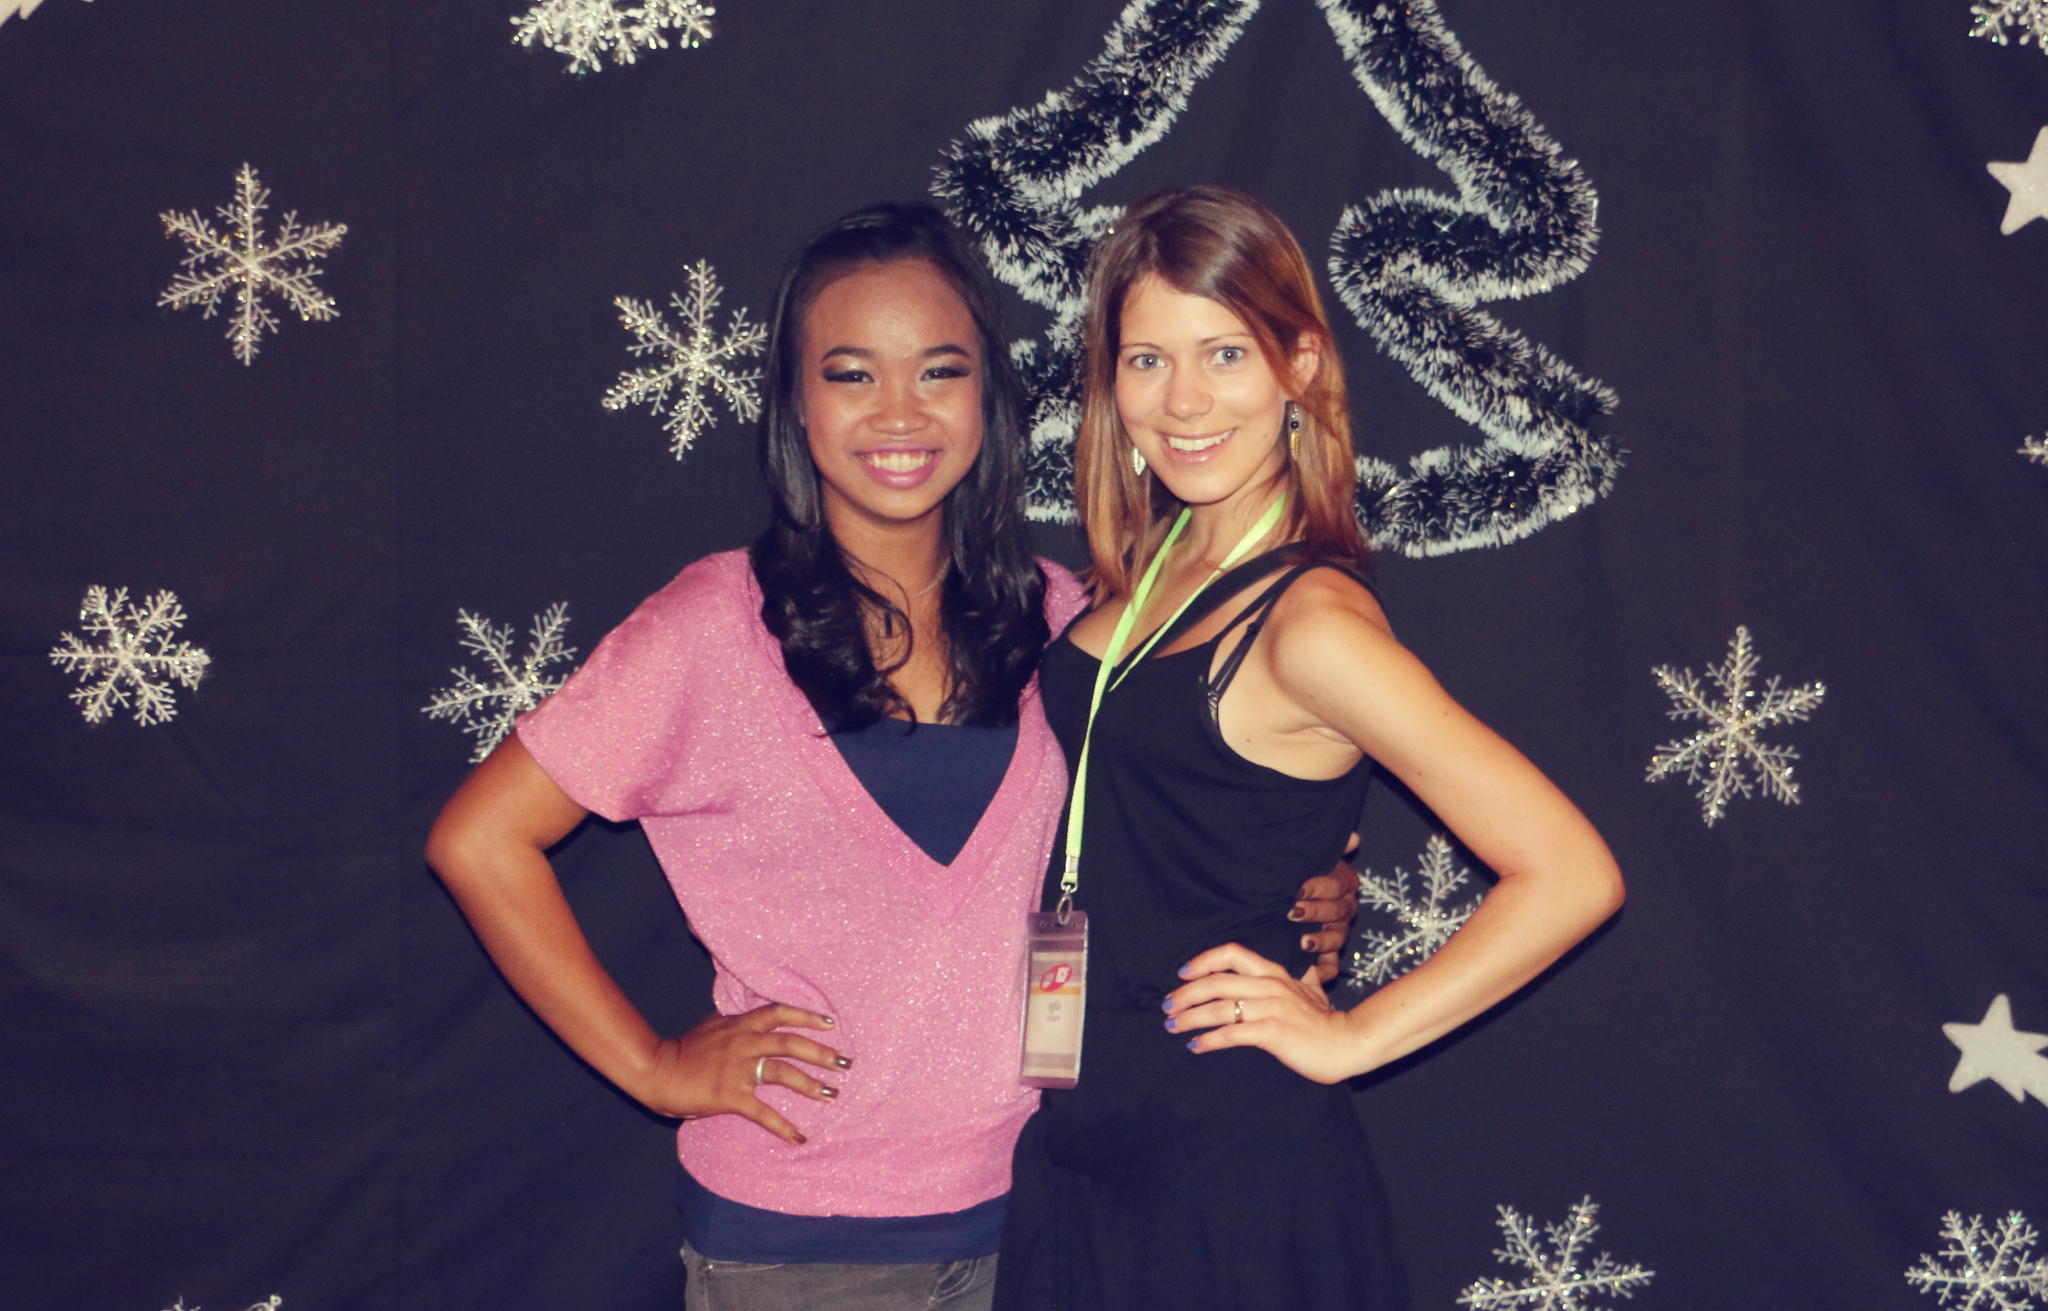 two young women standing next to each other near snow flakes